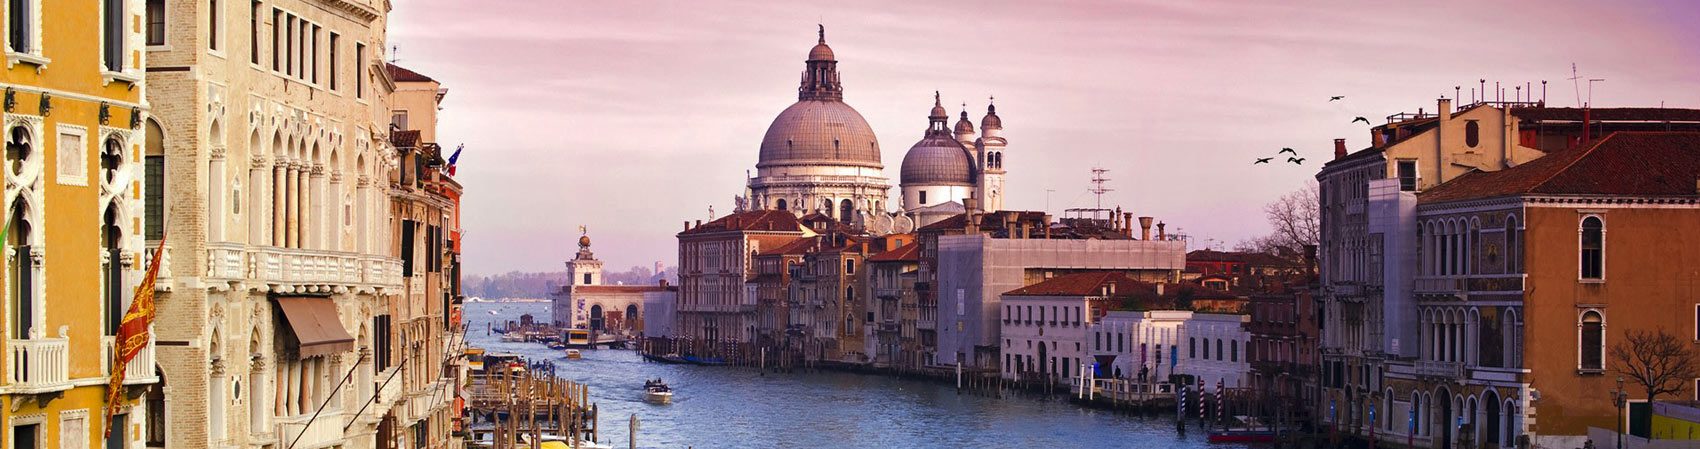 Venice, Italy: Boat Ride on the Grand Canal